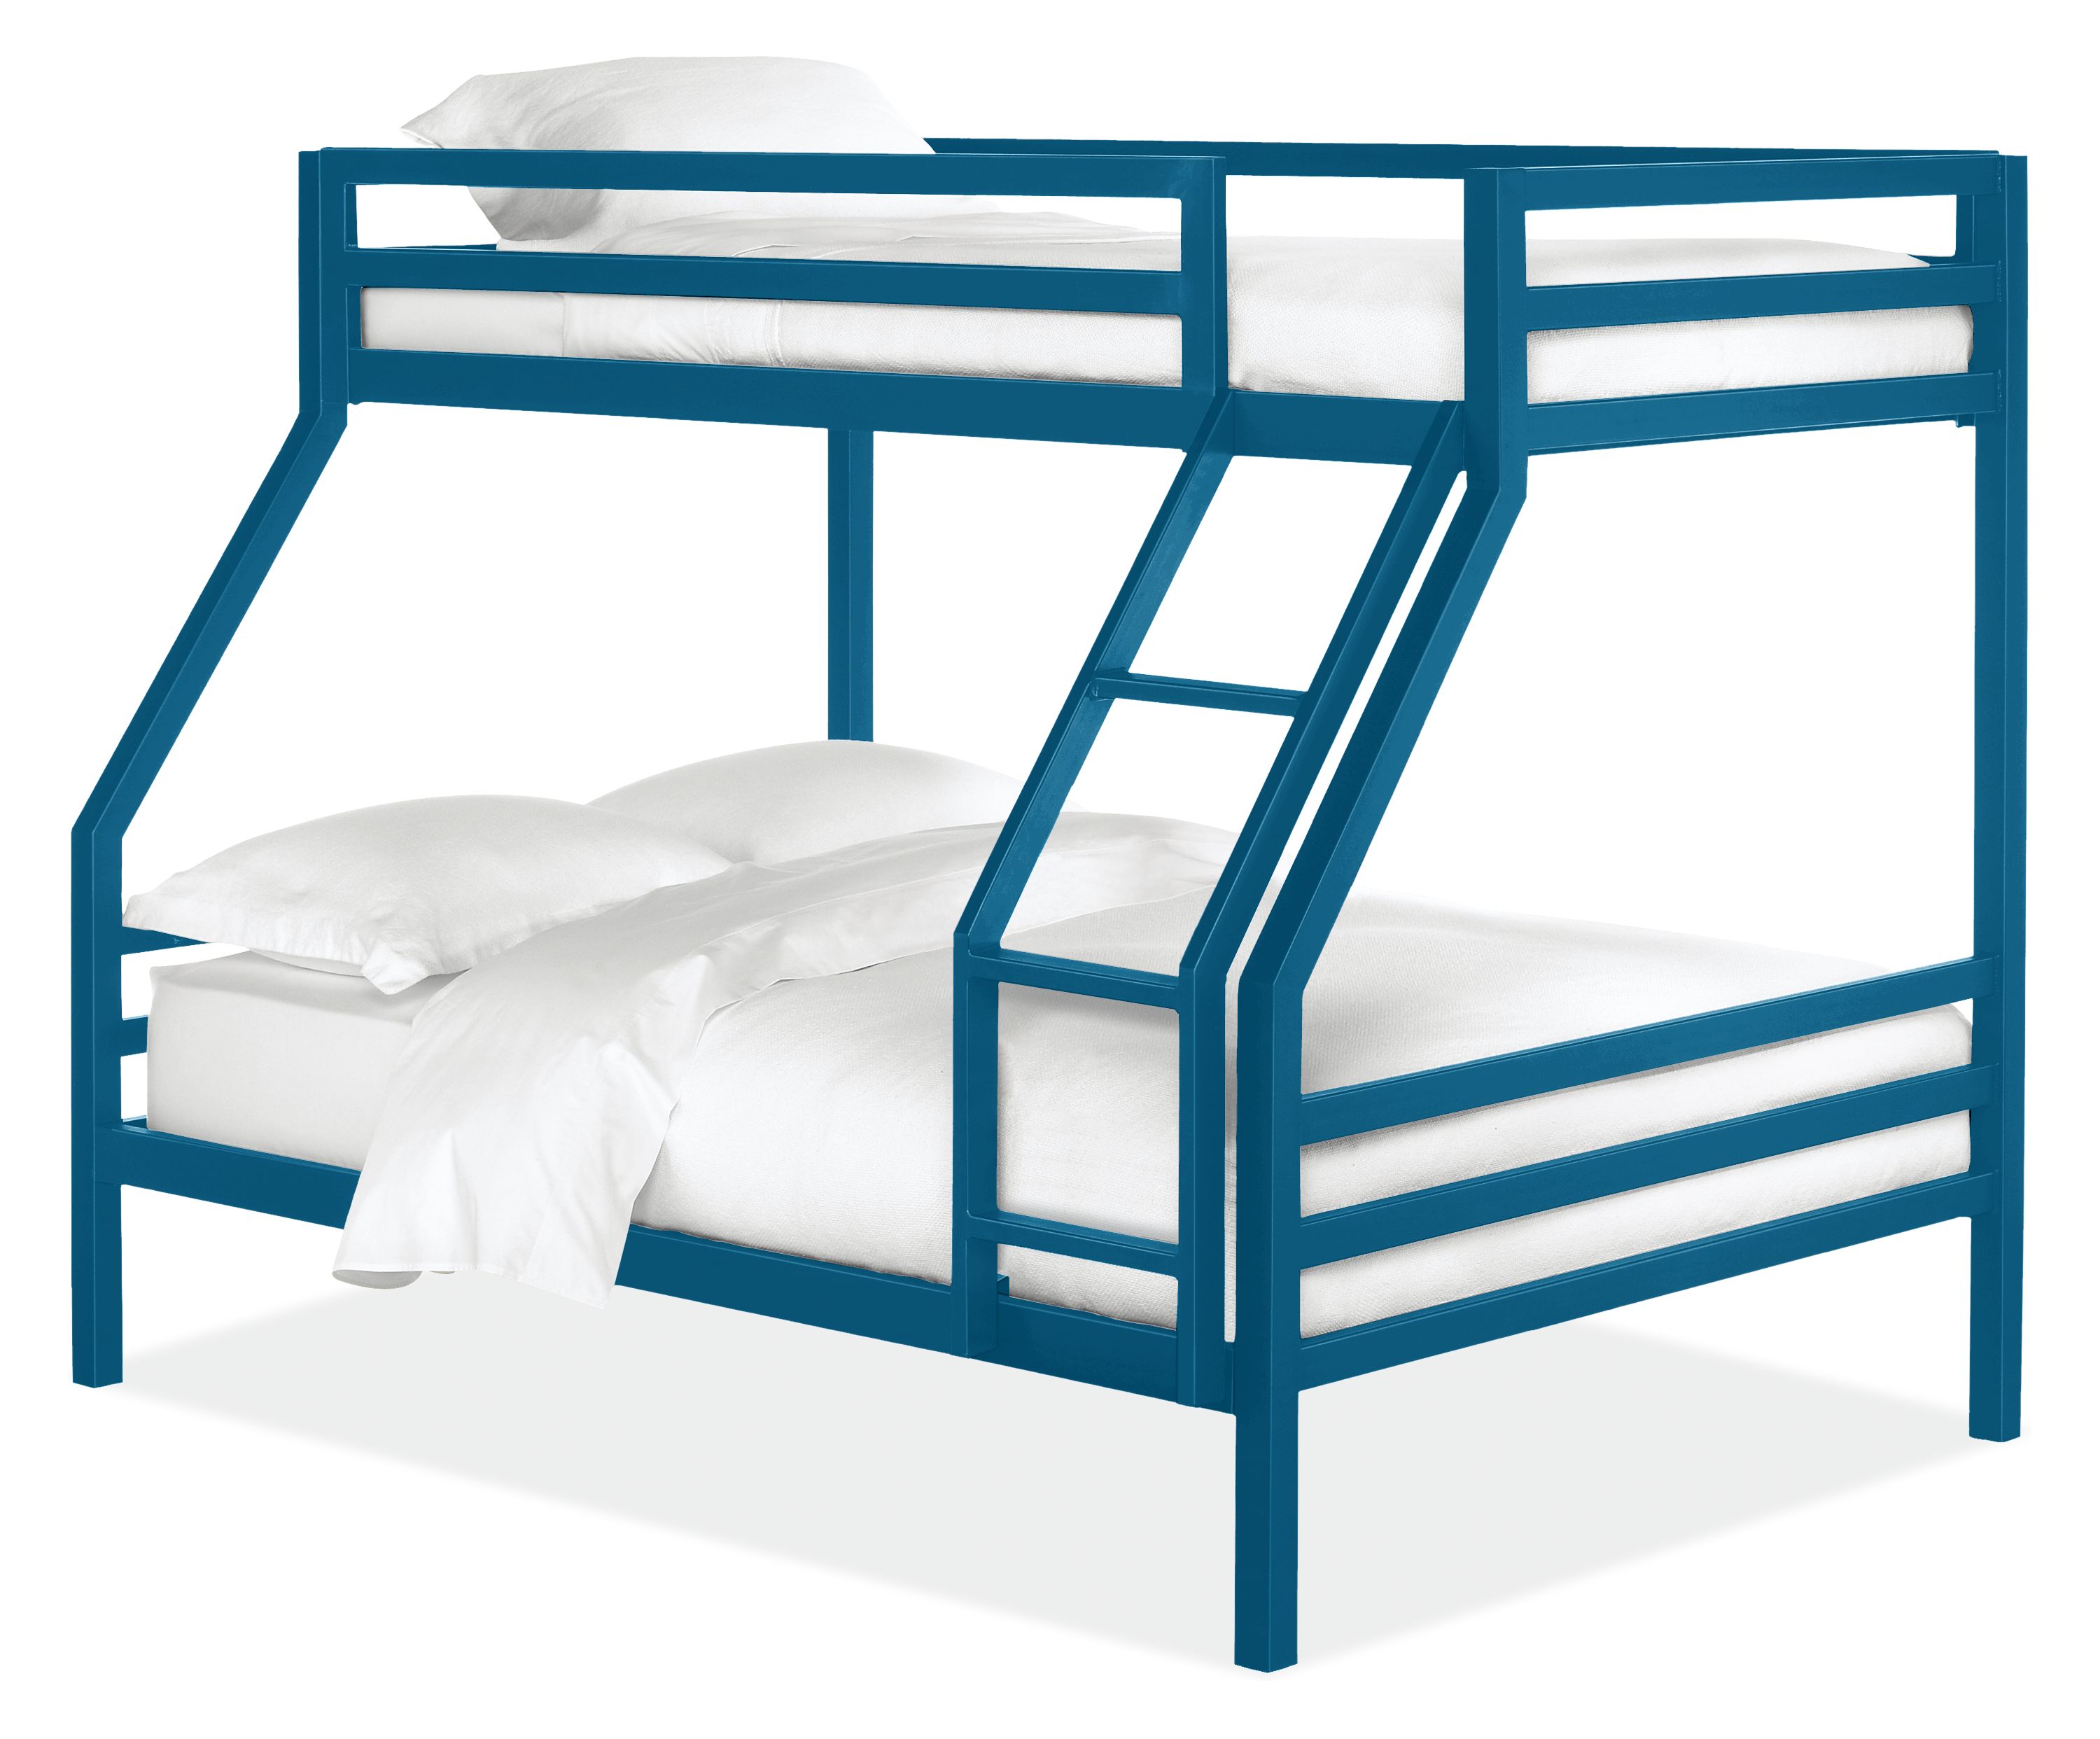 Fort Bunk Beds In Colors Twin Over, Rooms To Go Bunk Bed Assembly Instructions